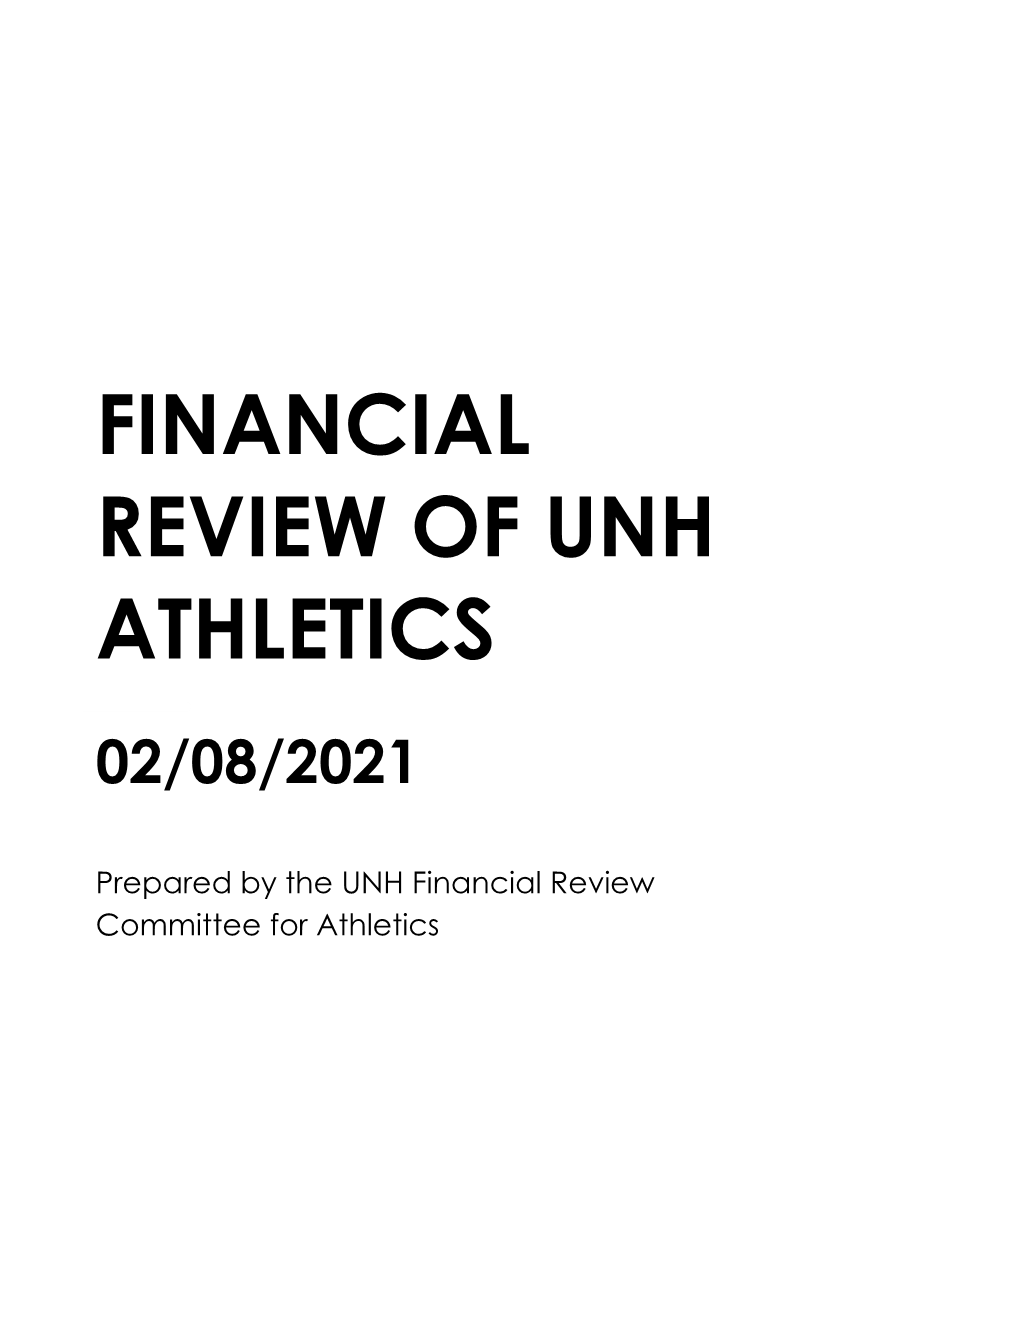 Financial Review of Unh Athletics